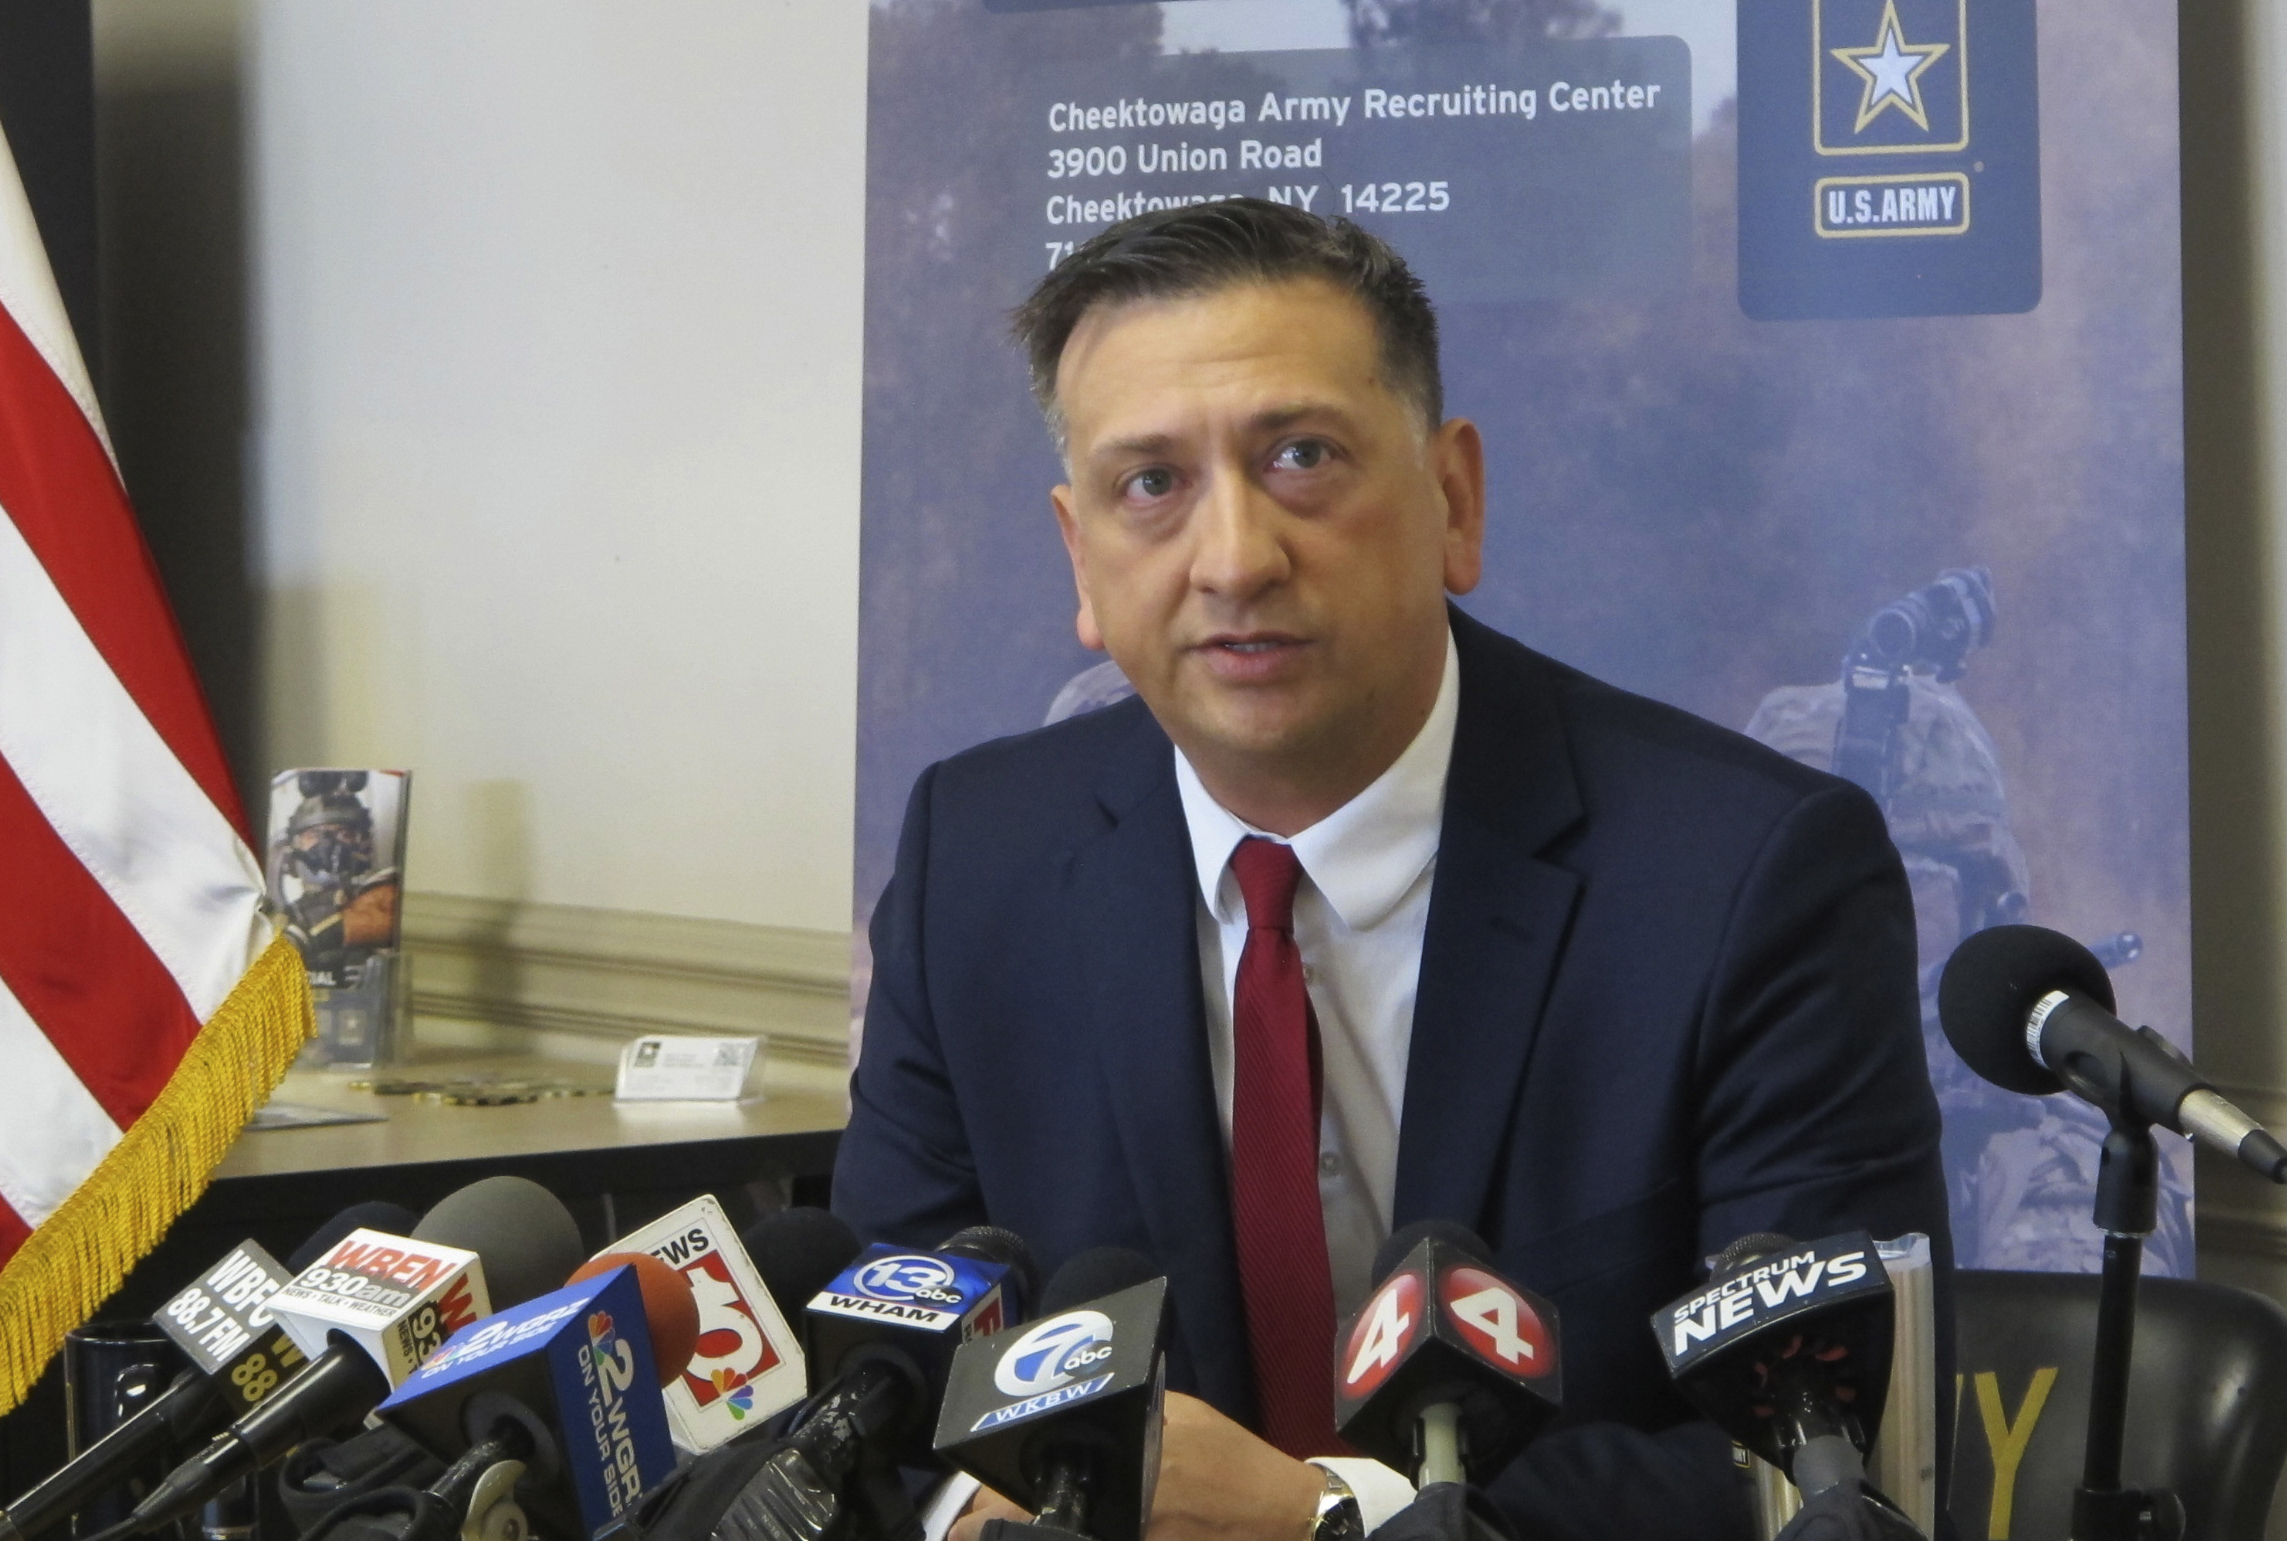 PHOTO: Staff Sgt. David Bellavia, of Lyndonville, N.Y., speaks at a news conference at an Army recruiting station in Cheektowaga, N.Y., June 11, 2019.